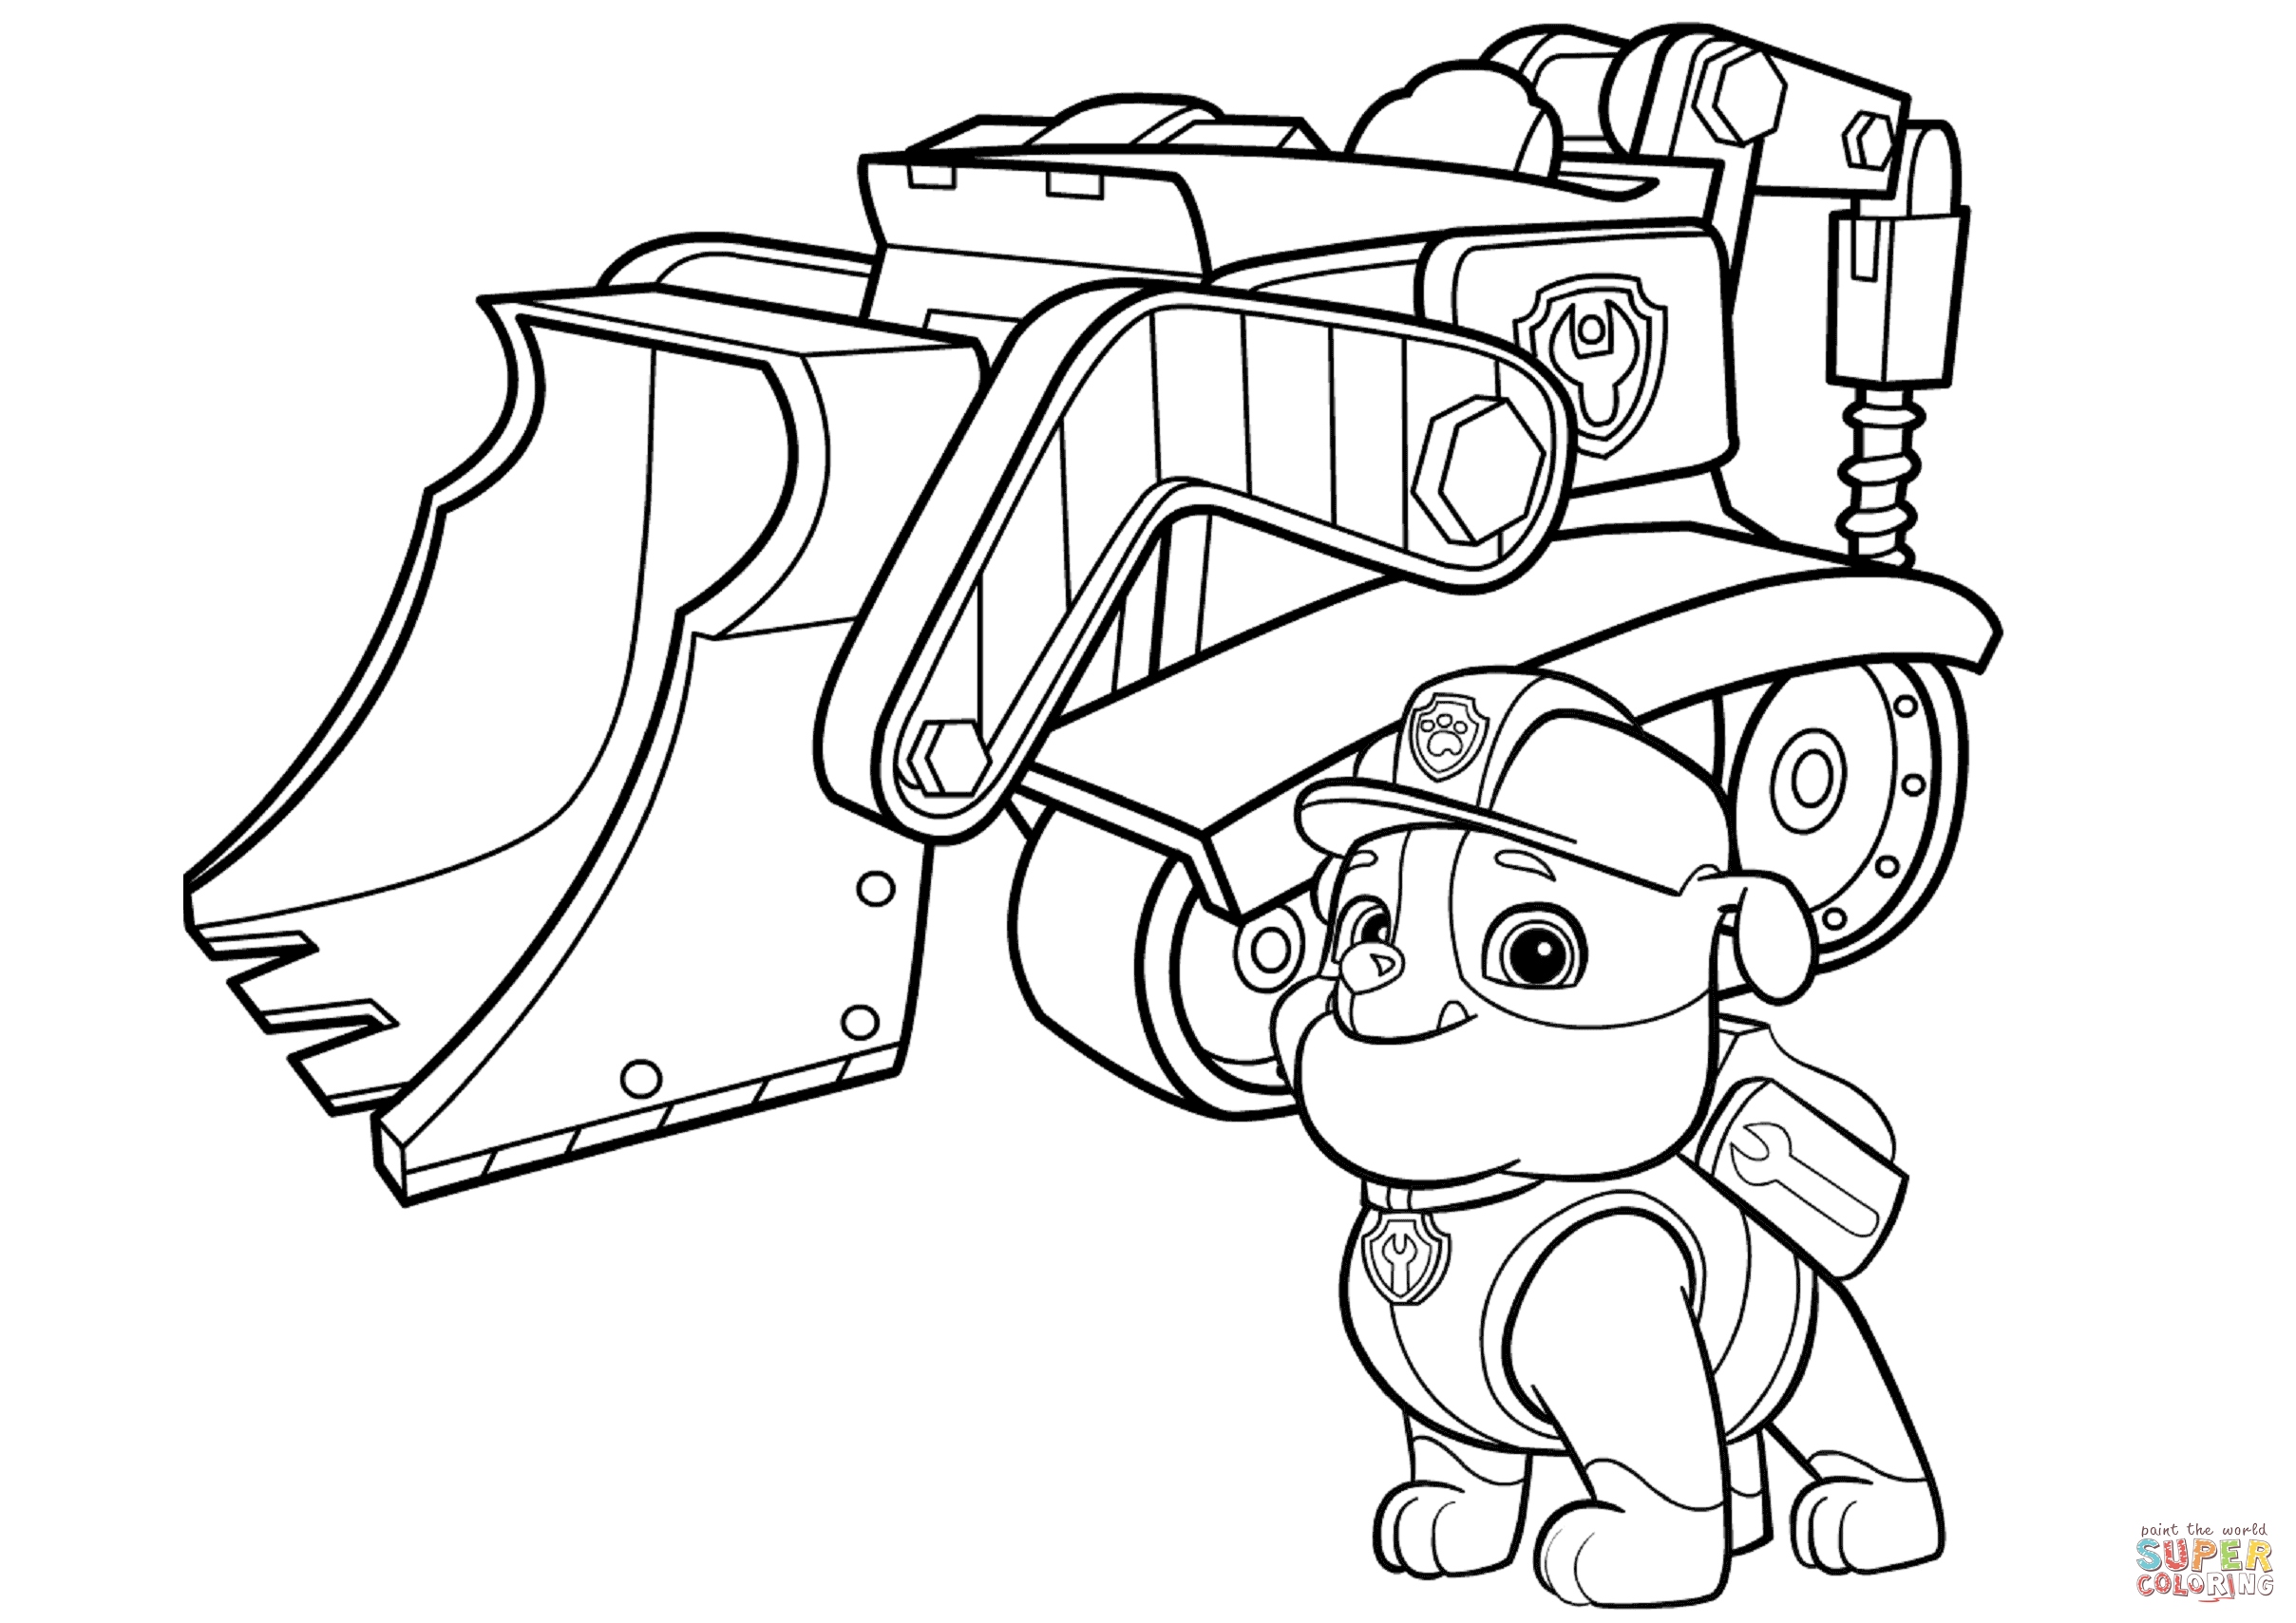 The best free Robo coloring page images. Download from 34 free coloring